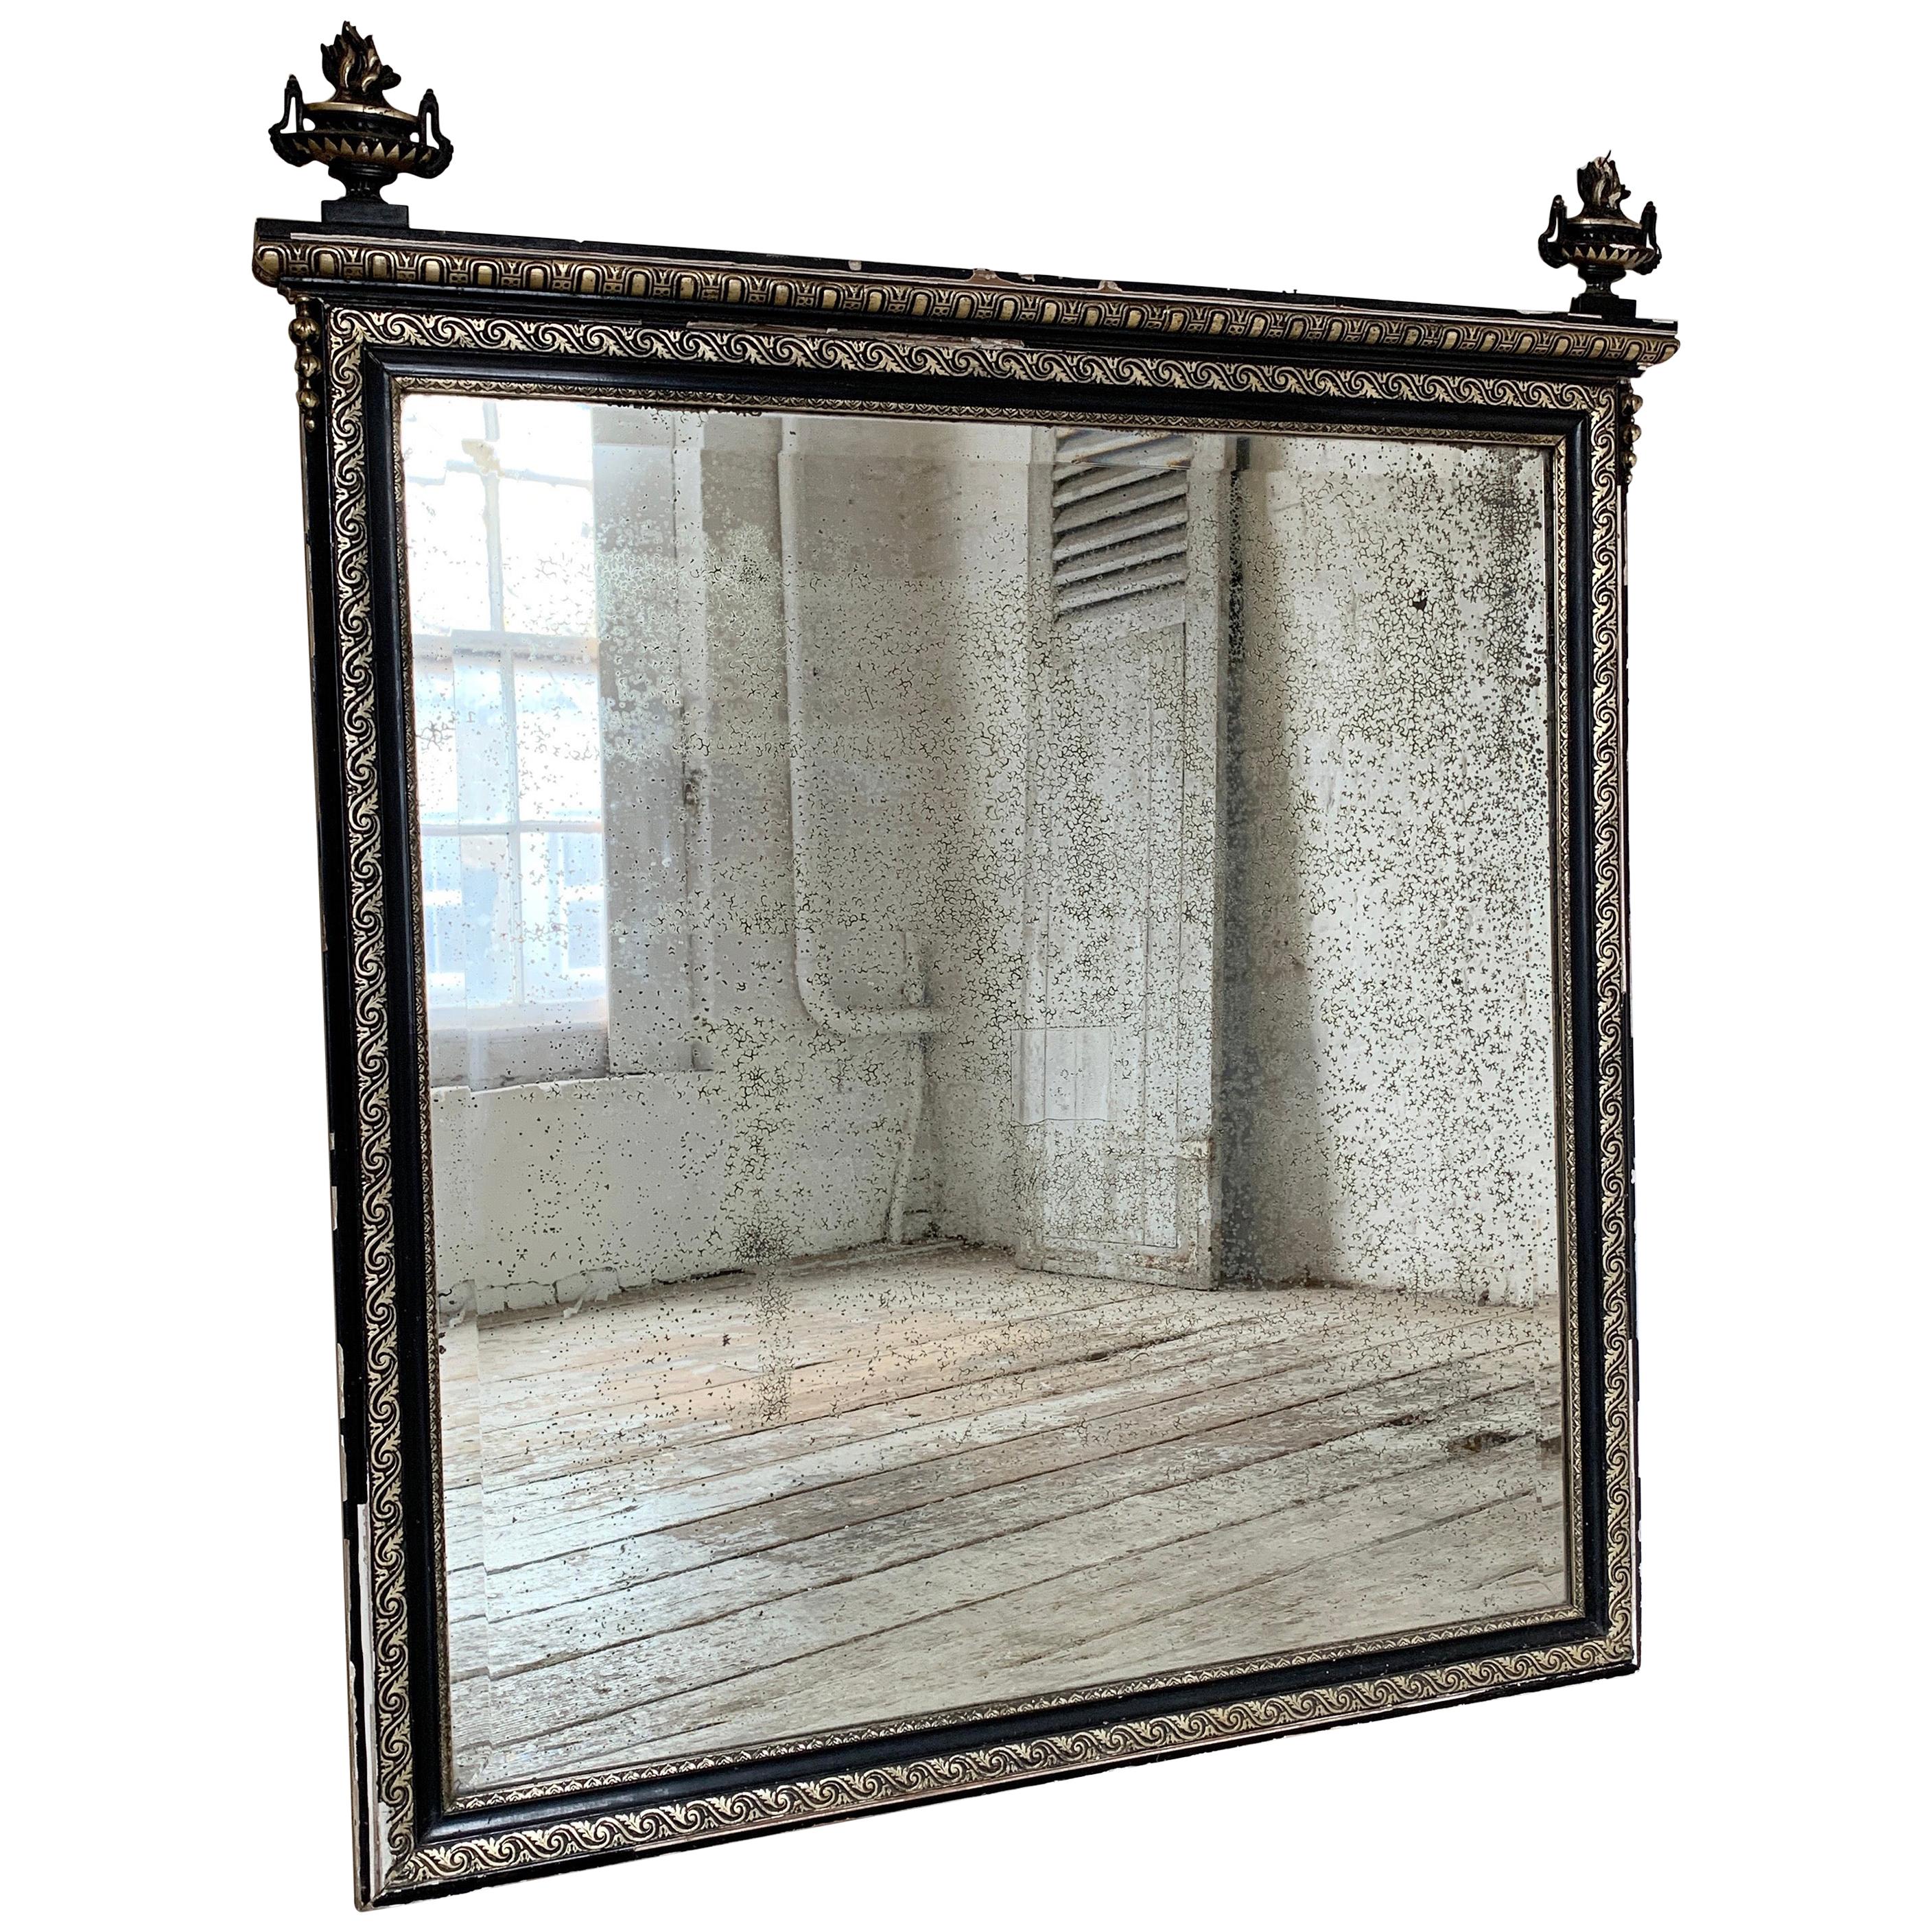 Antique Silver Backed Mantle Mirror, 1800s